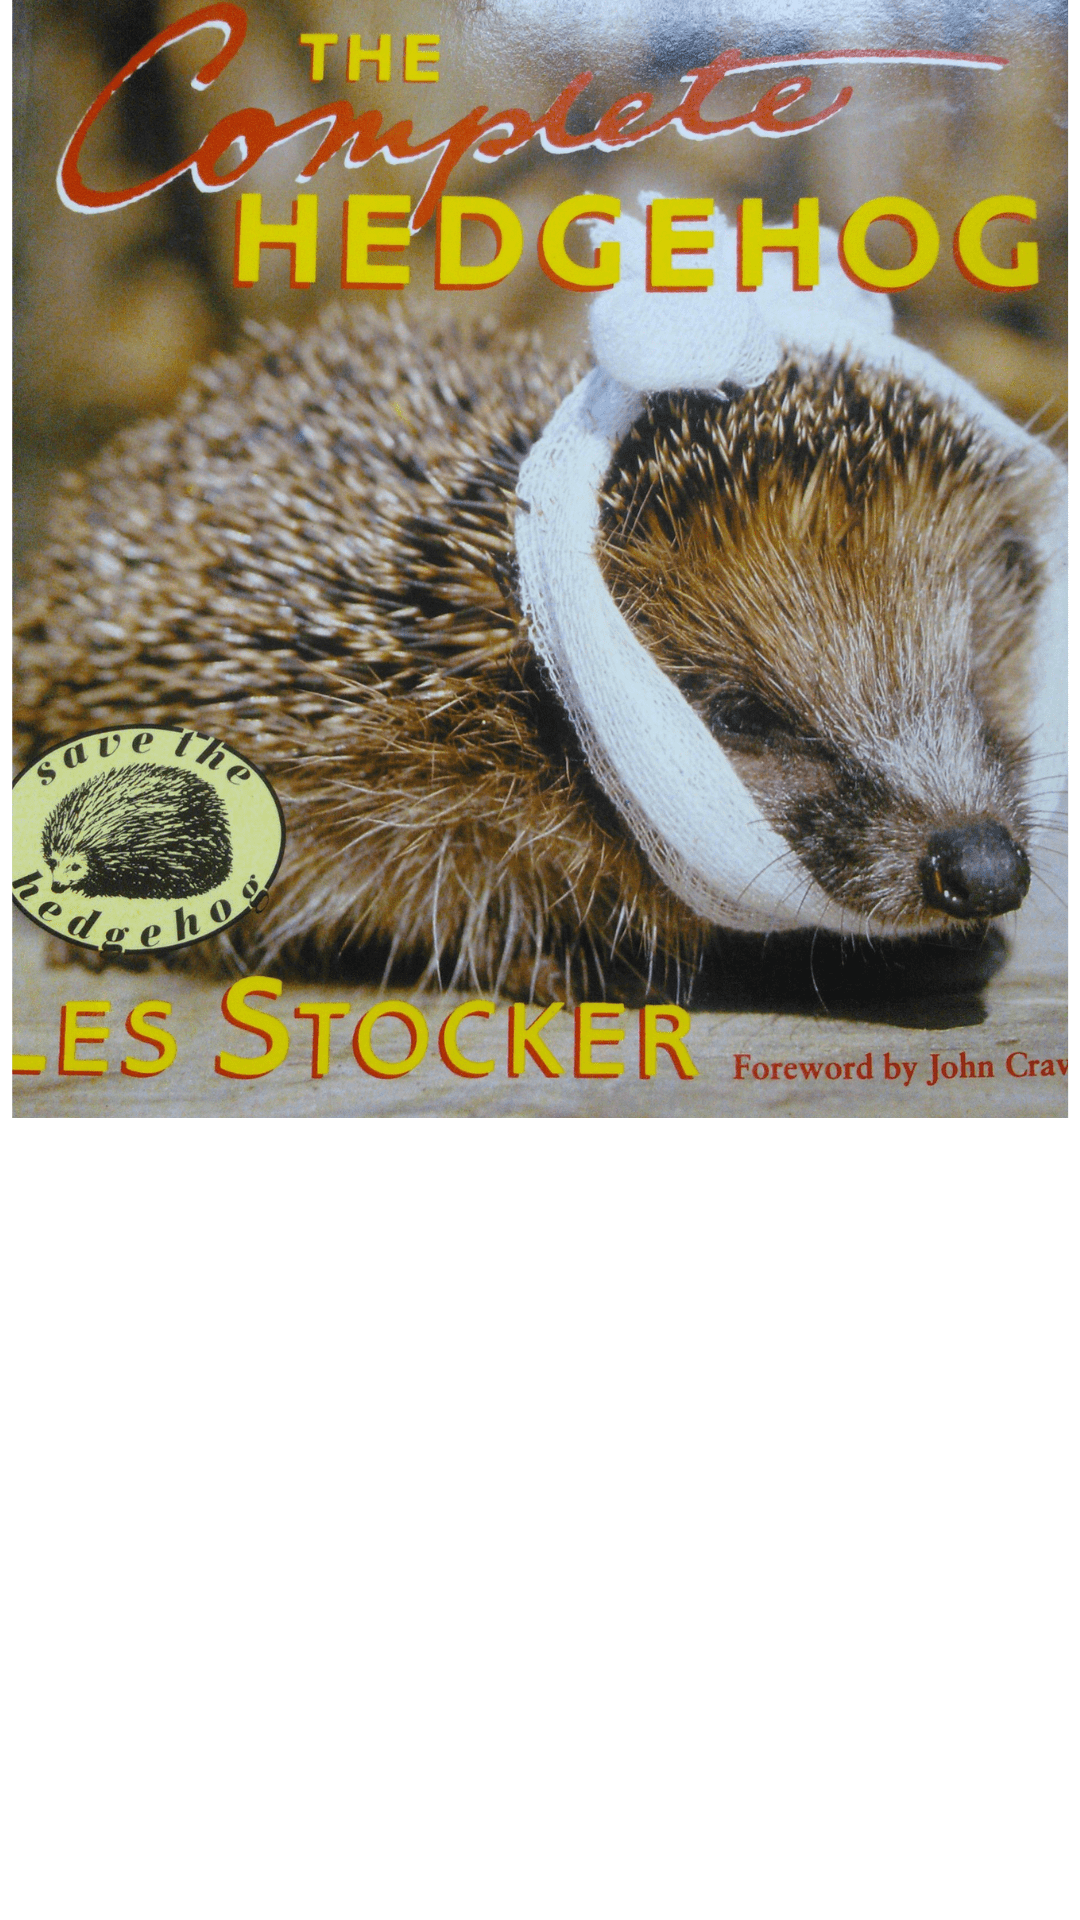 The Complete Hedgehog by Les Stocker